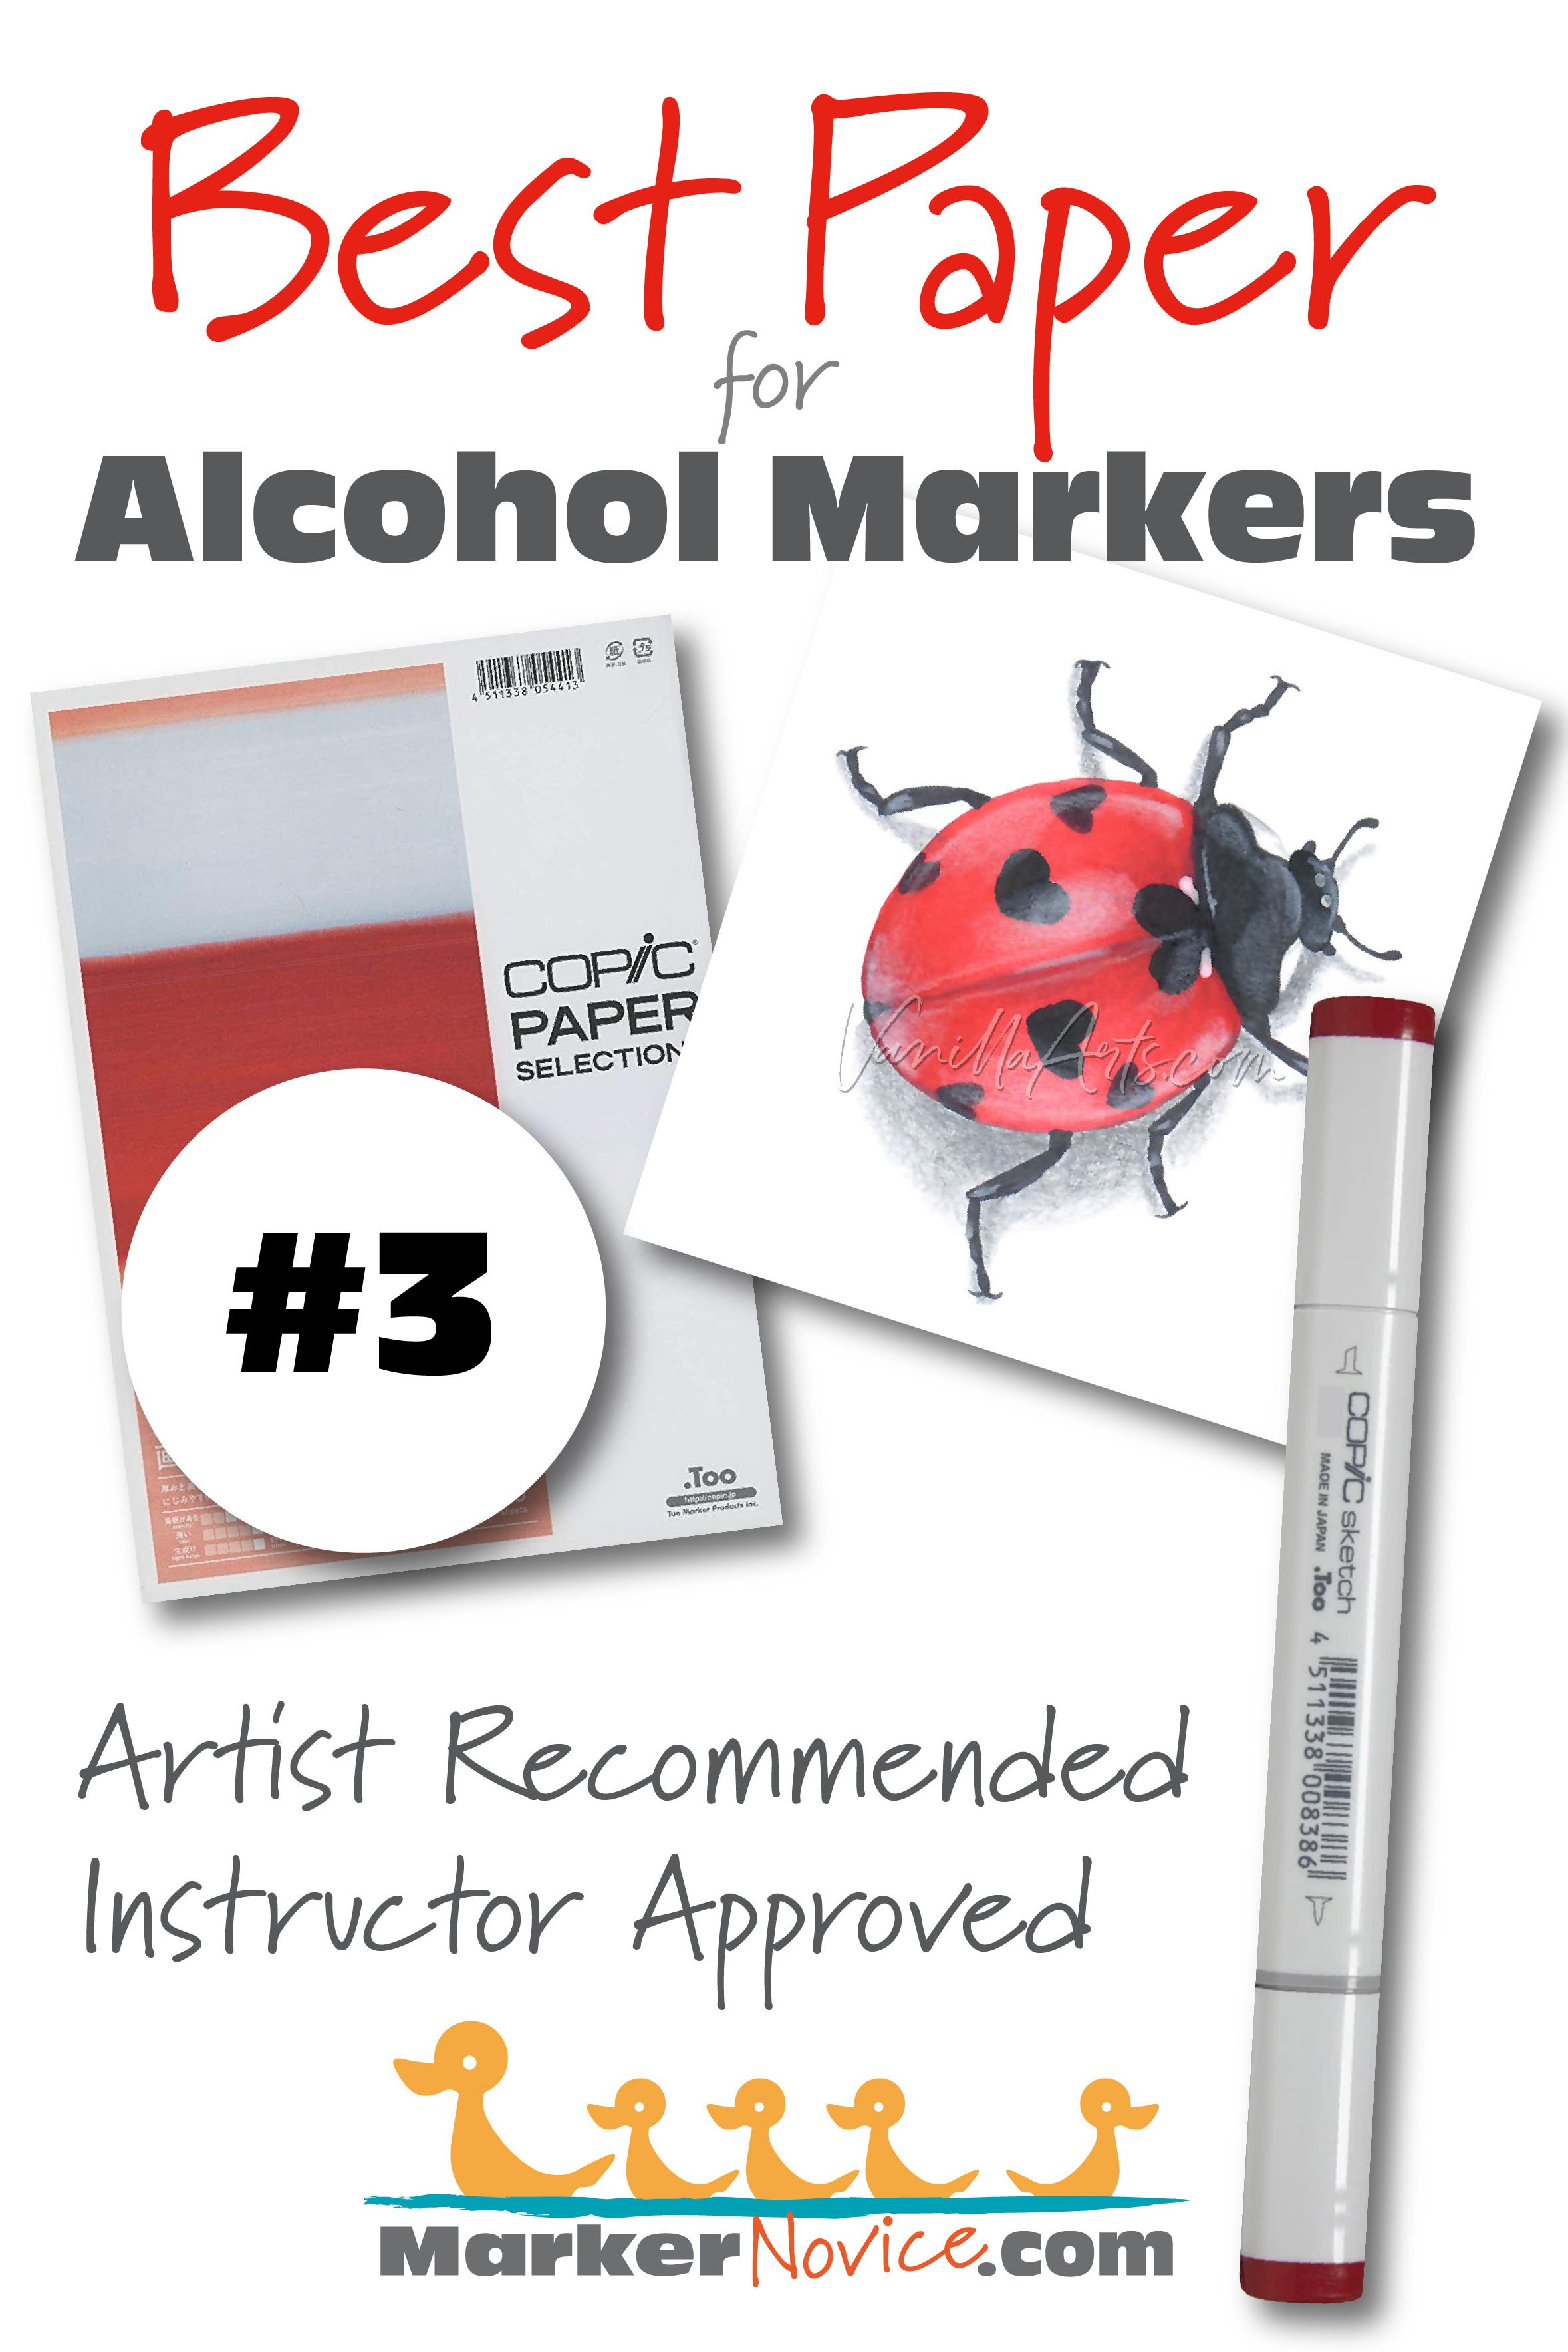 Alcohol Marker Brands: Detailed Reviews of the Best Brands by a